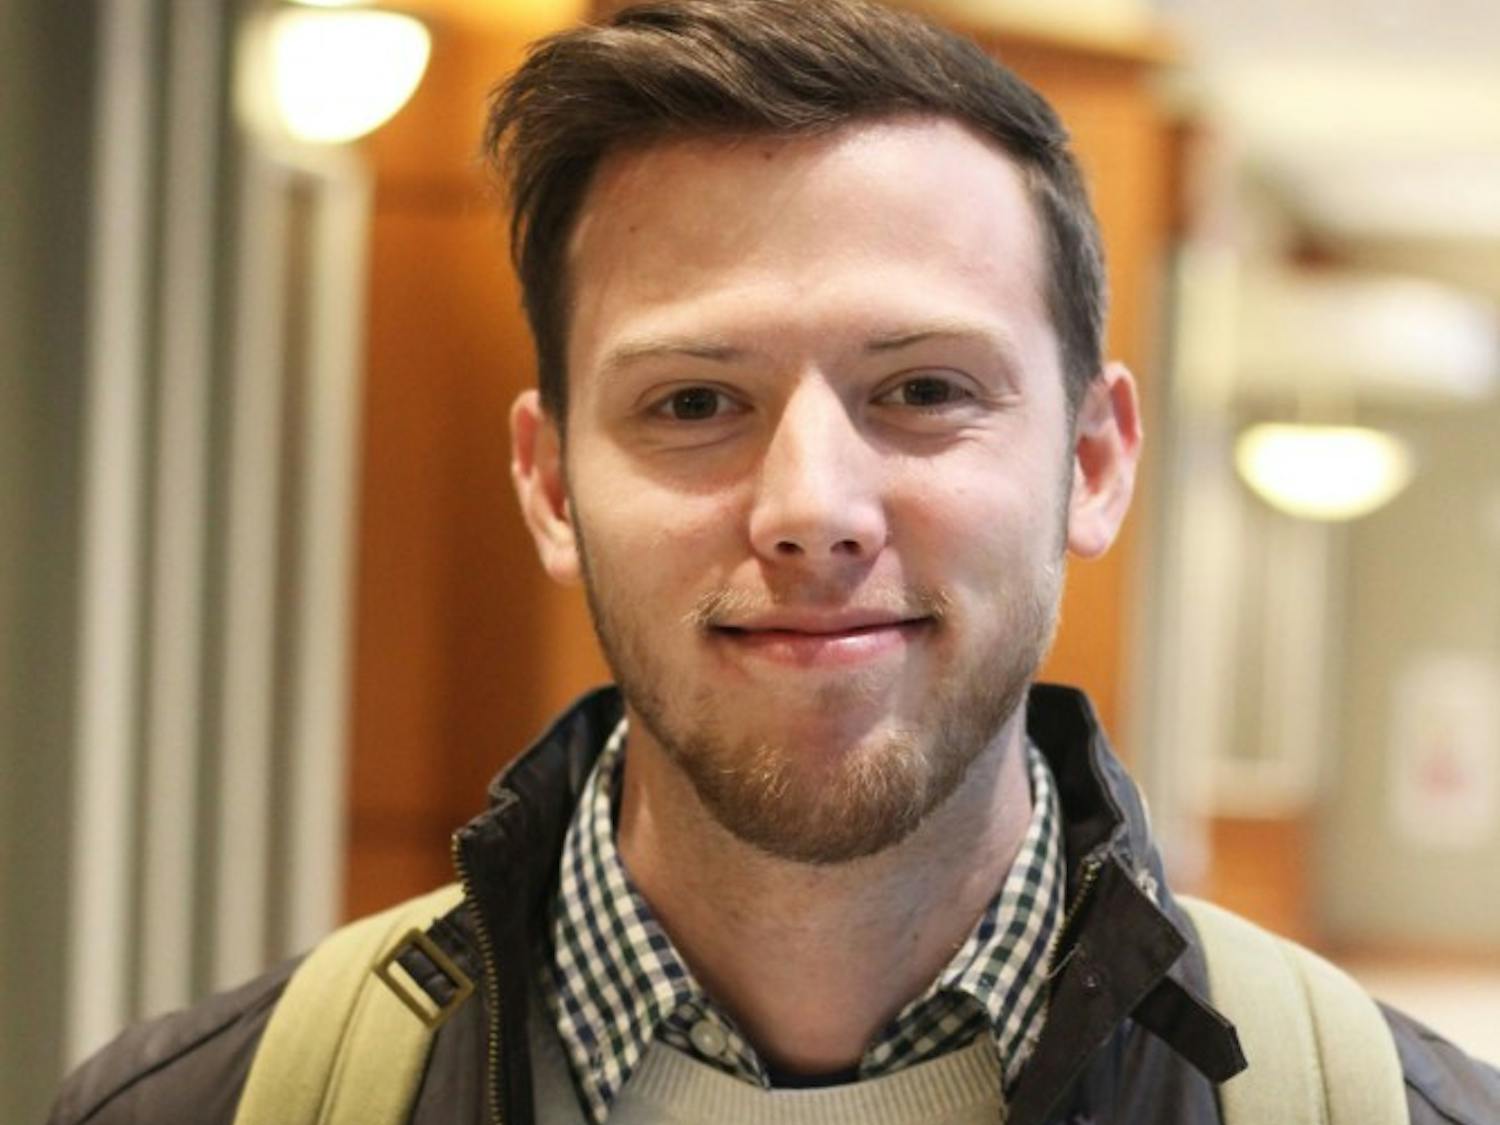 Josh Barclay, a first-year graduate student studying caution, personnel and critical studies  